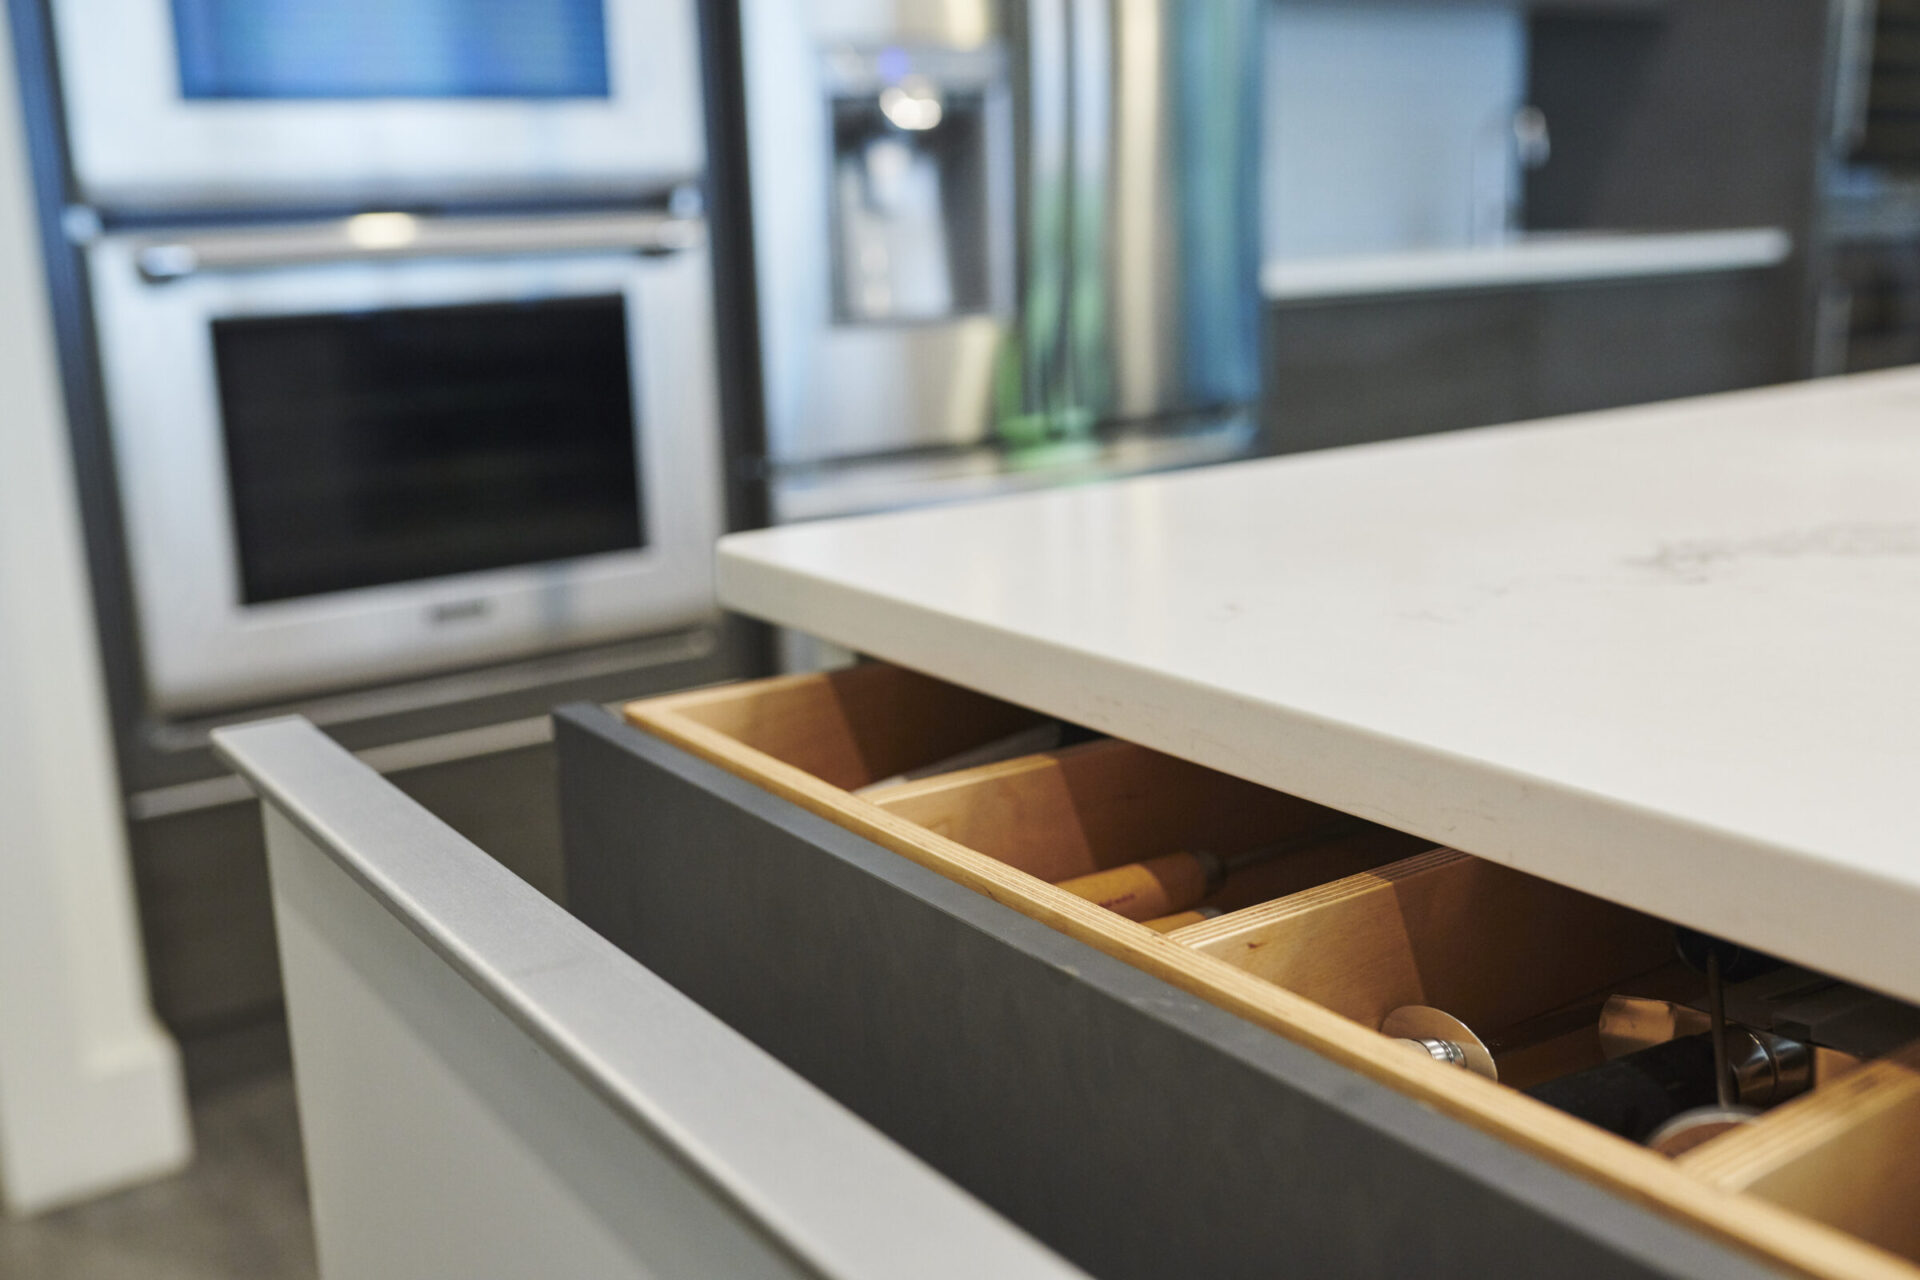 Modern kitchen interior showing a close-up of an open drawer with utensils, a countertop, stainless steel oven, and refrigerator in soft focus background.